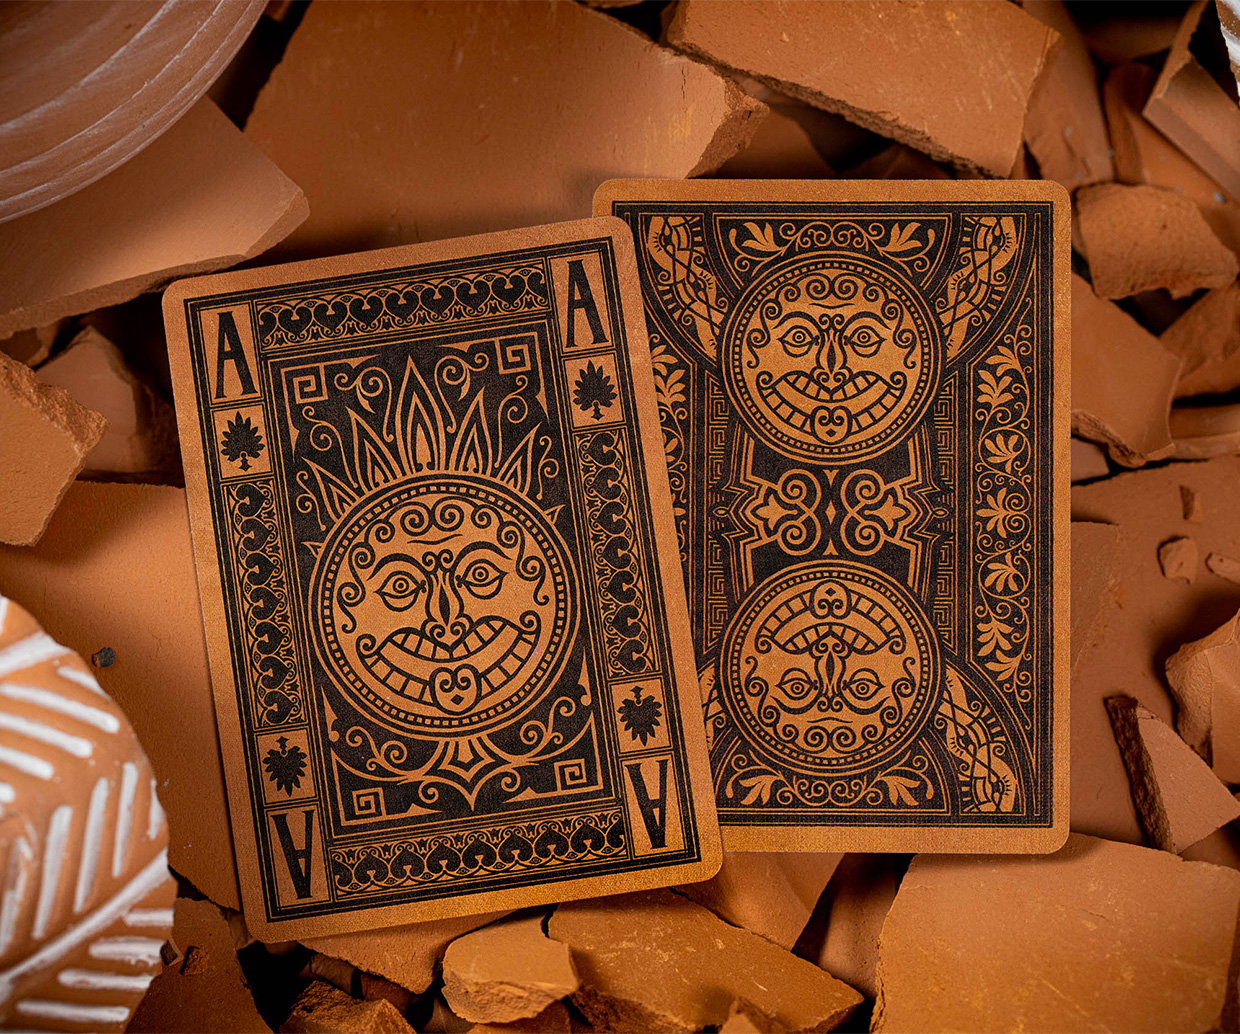 The Iliad Playing Cards